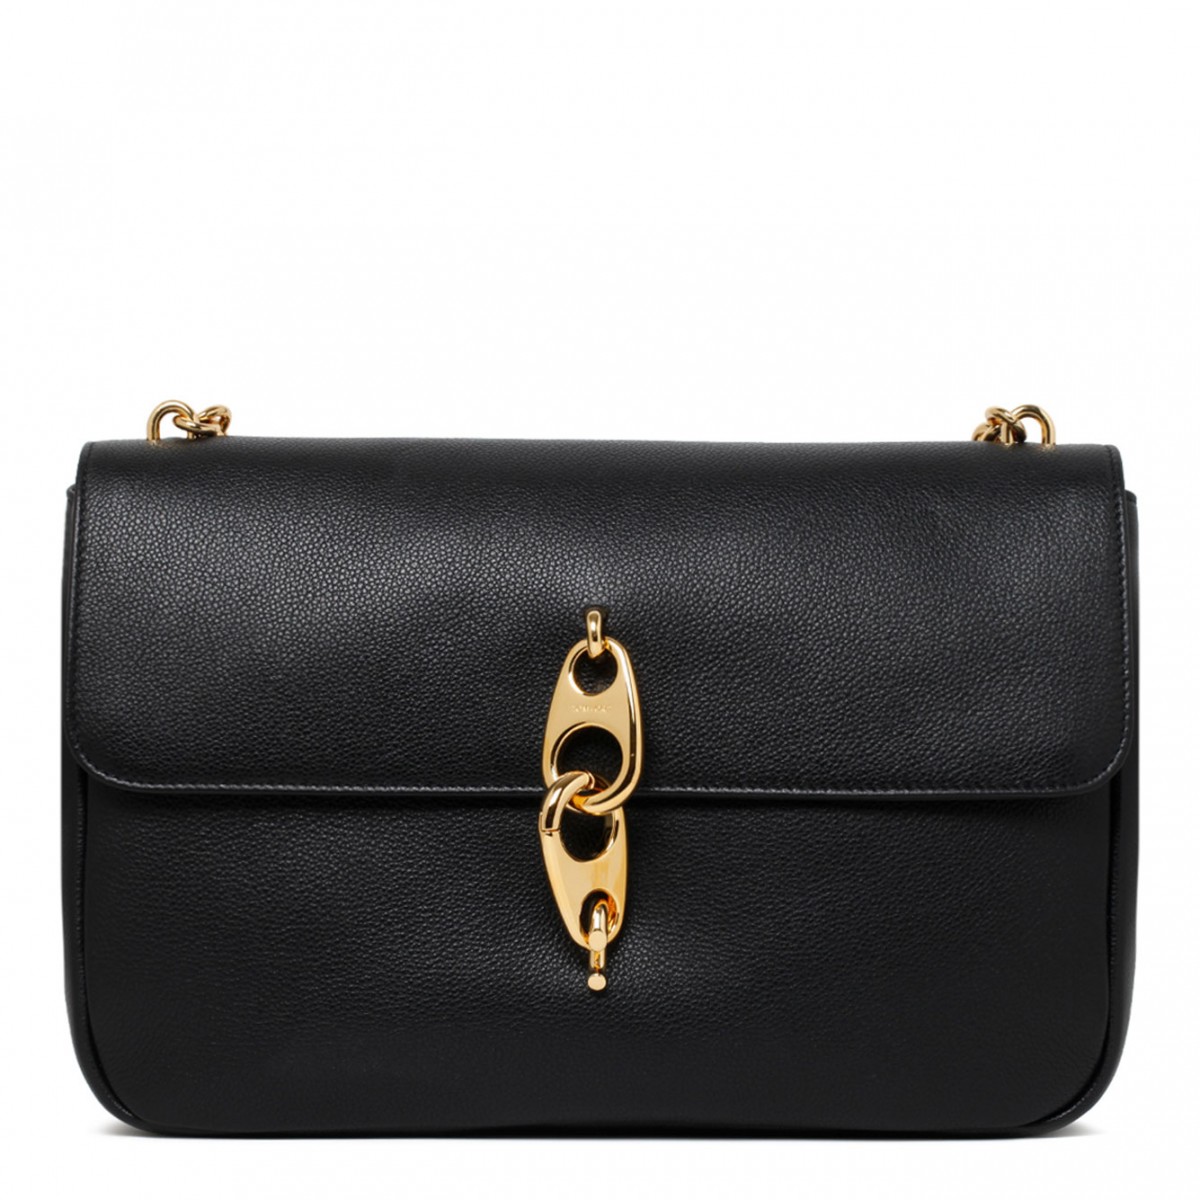 Tom Ford Black Leather Chain Link Handle Tote Bag